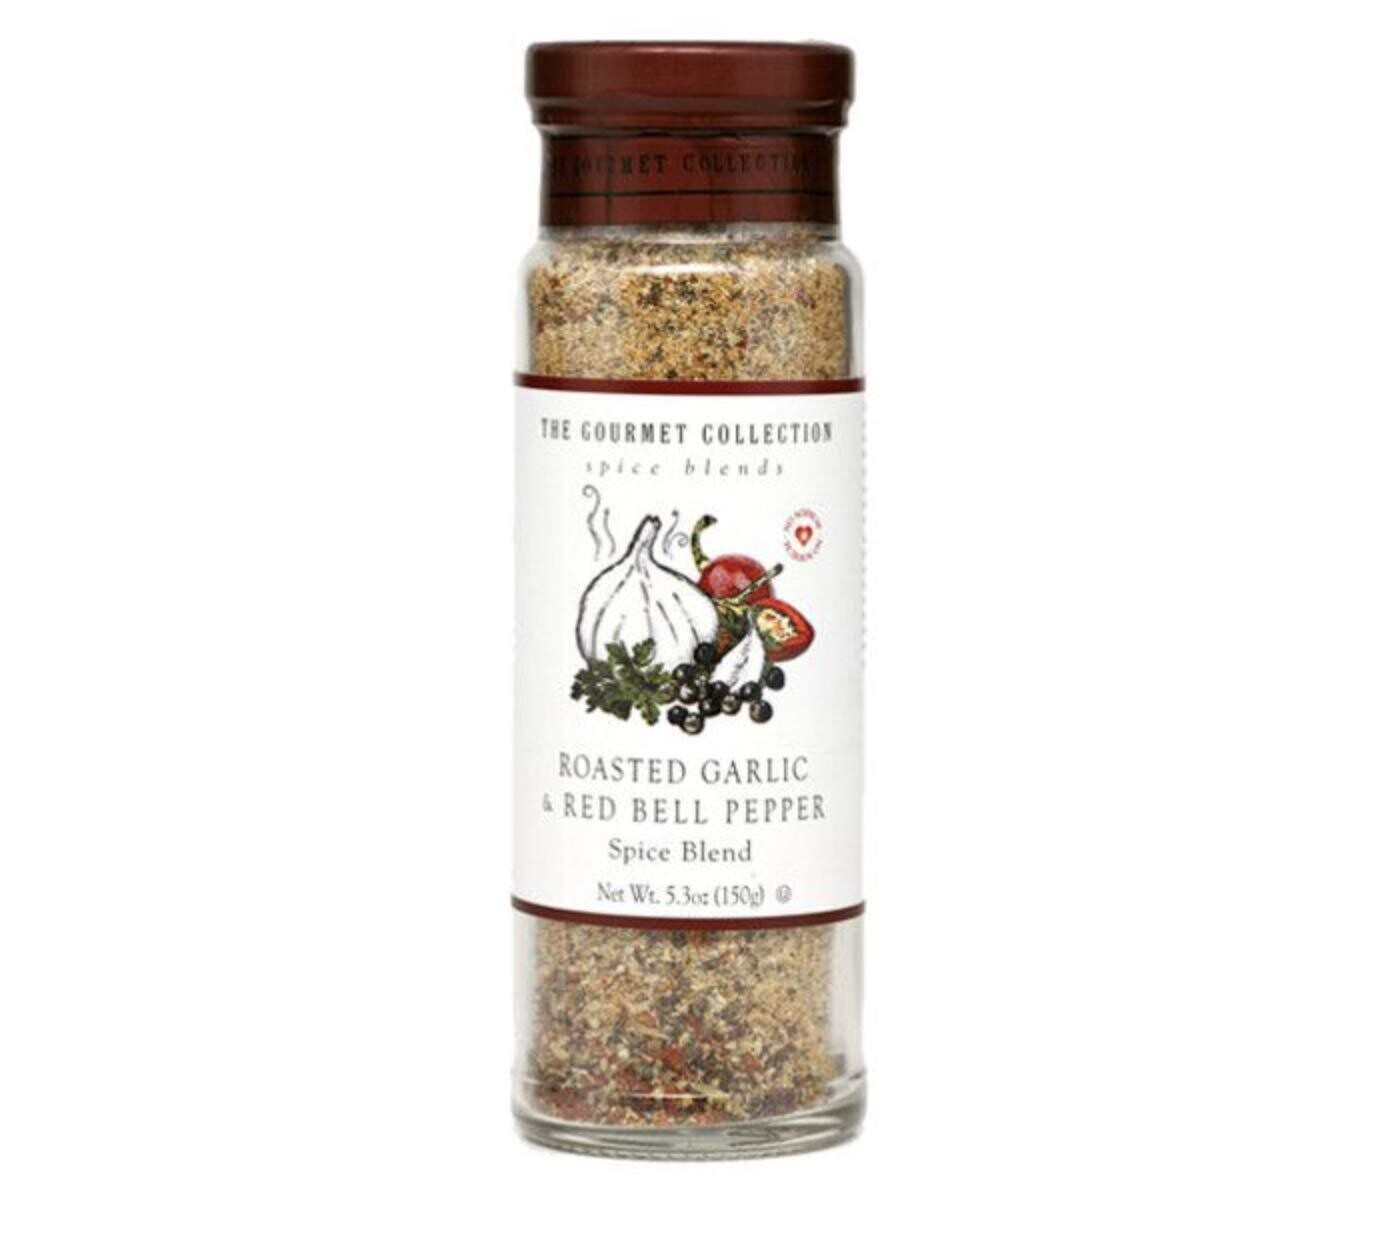 The Gourmet Collection Roasted Garlic & Red Bell Pepper